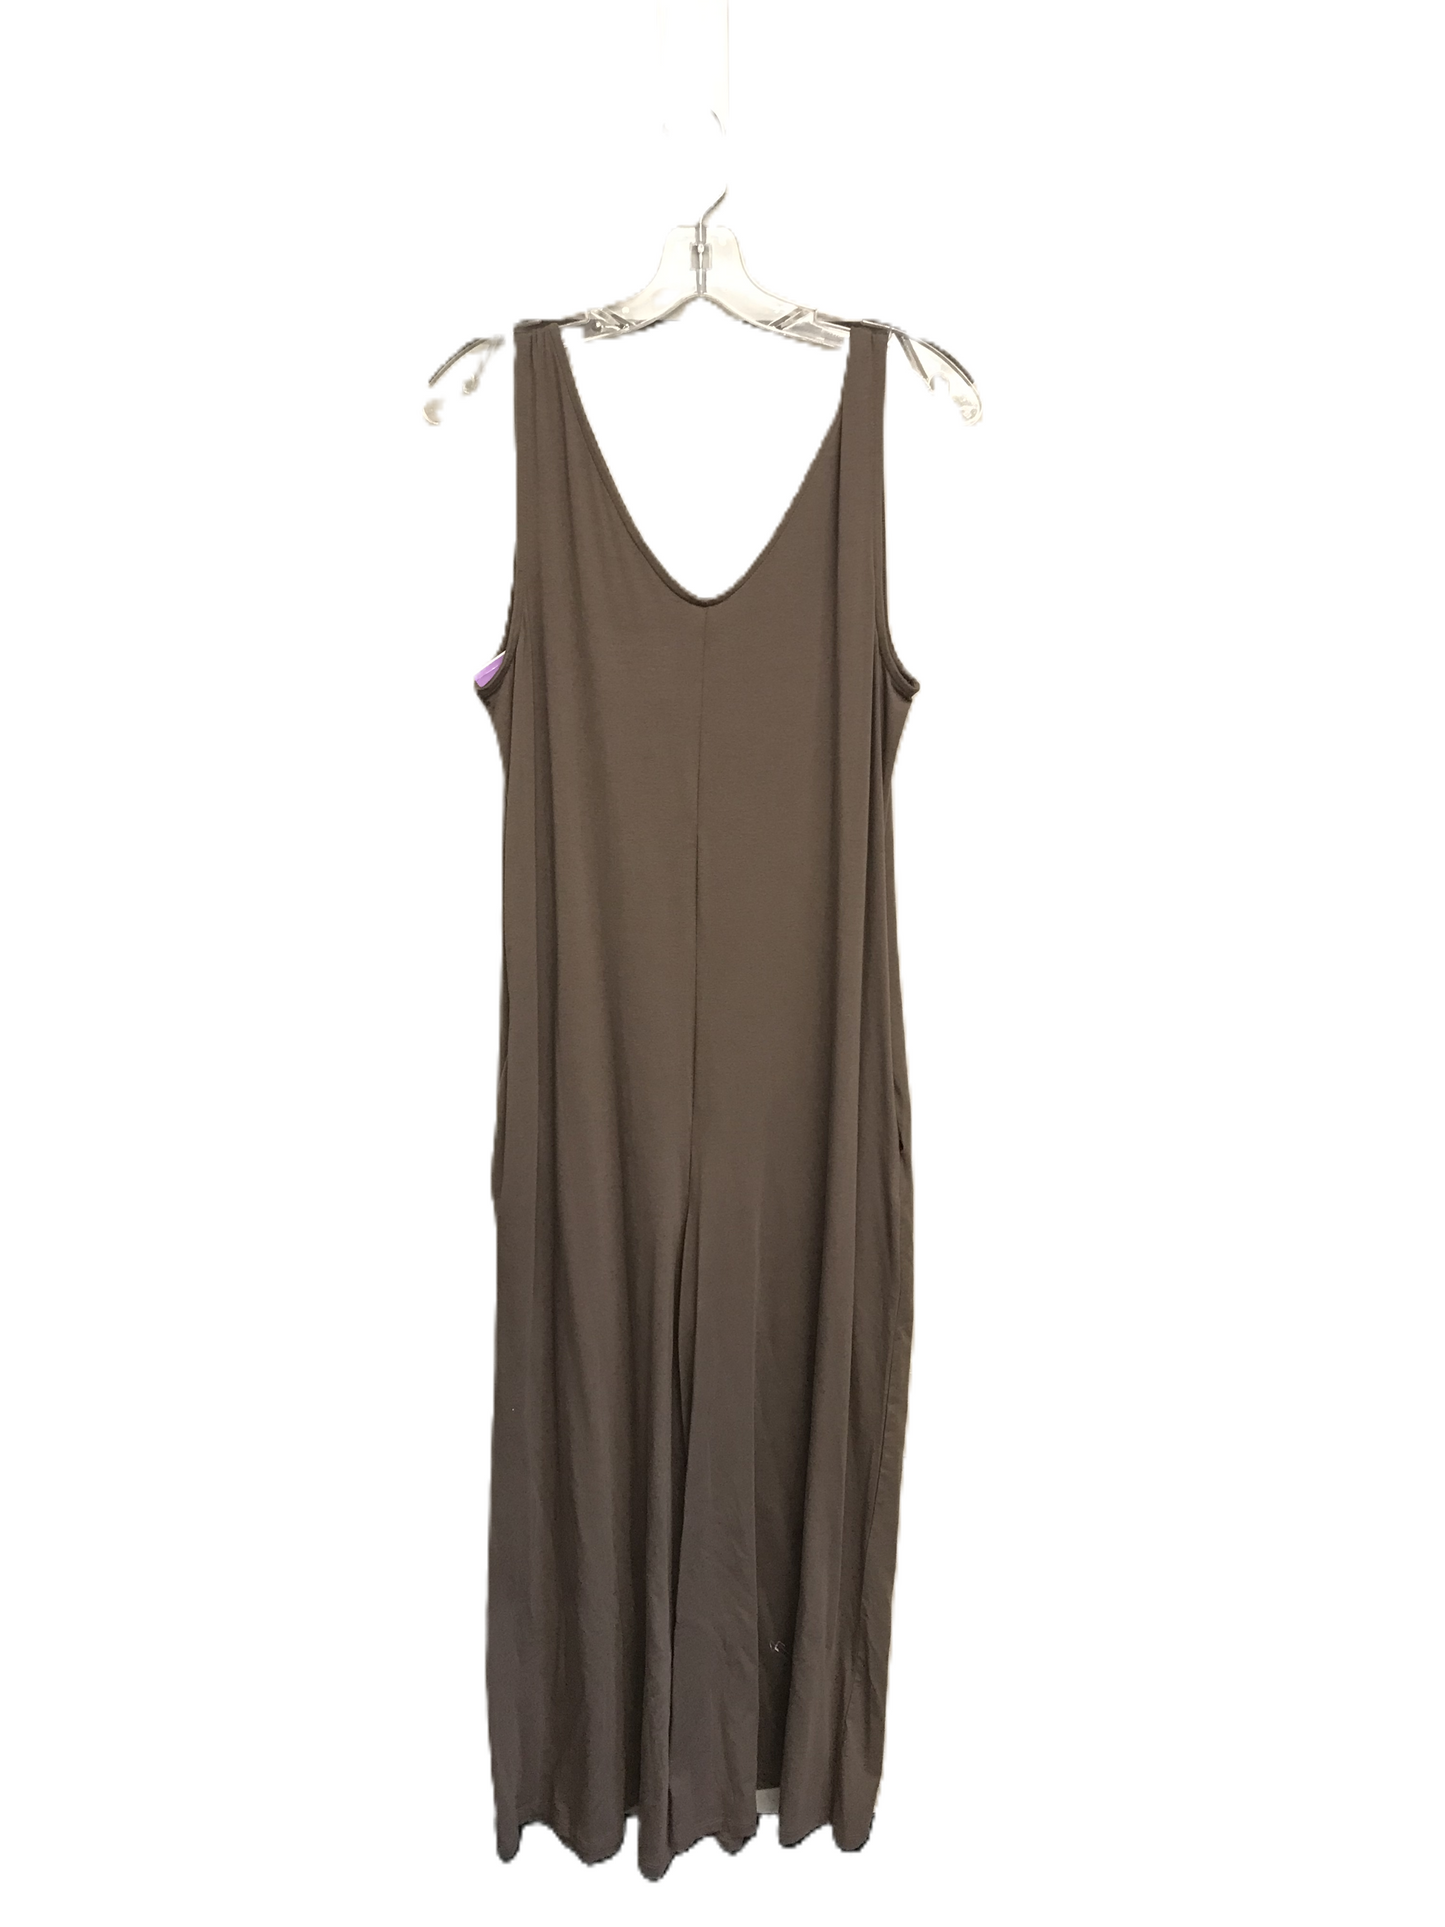 Brown Jumpsuit By Any Body, Size: S